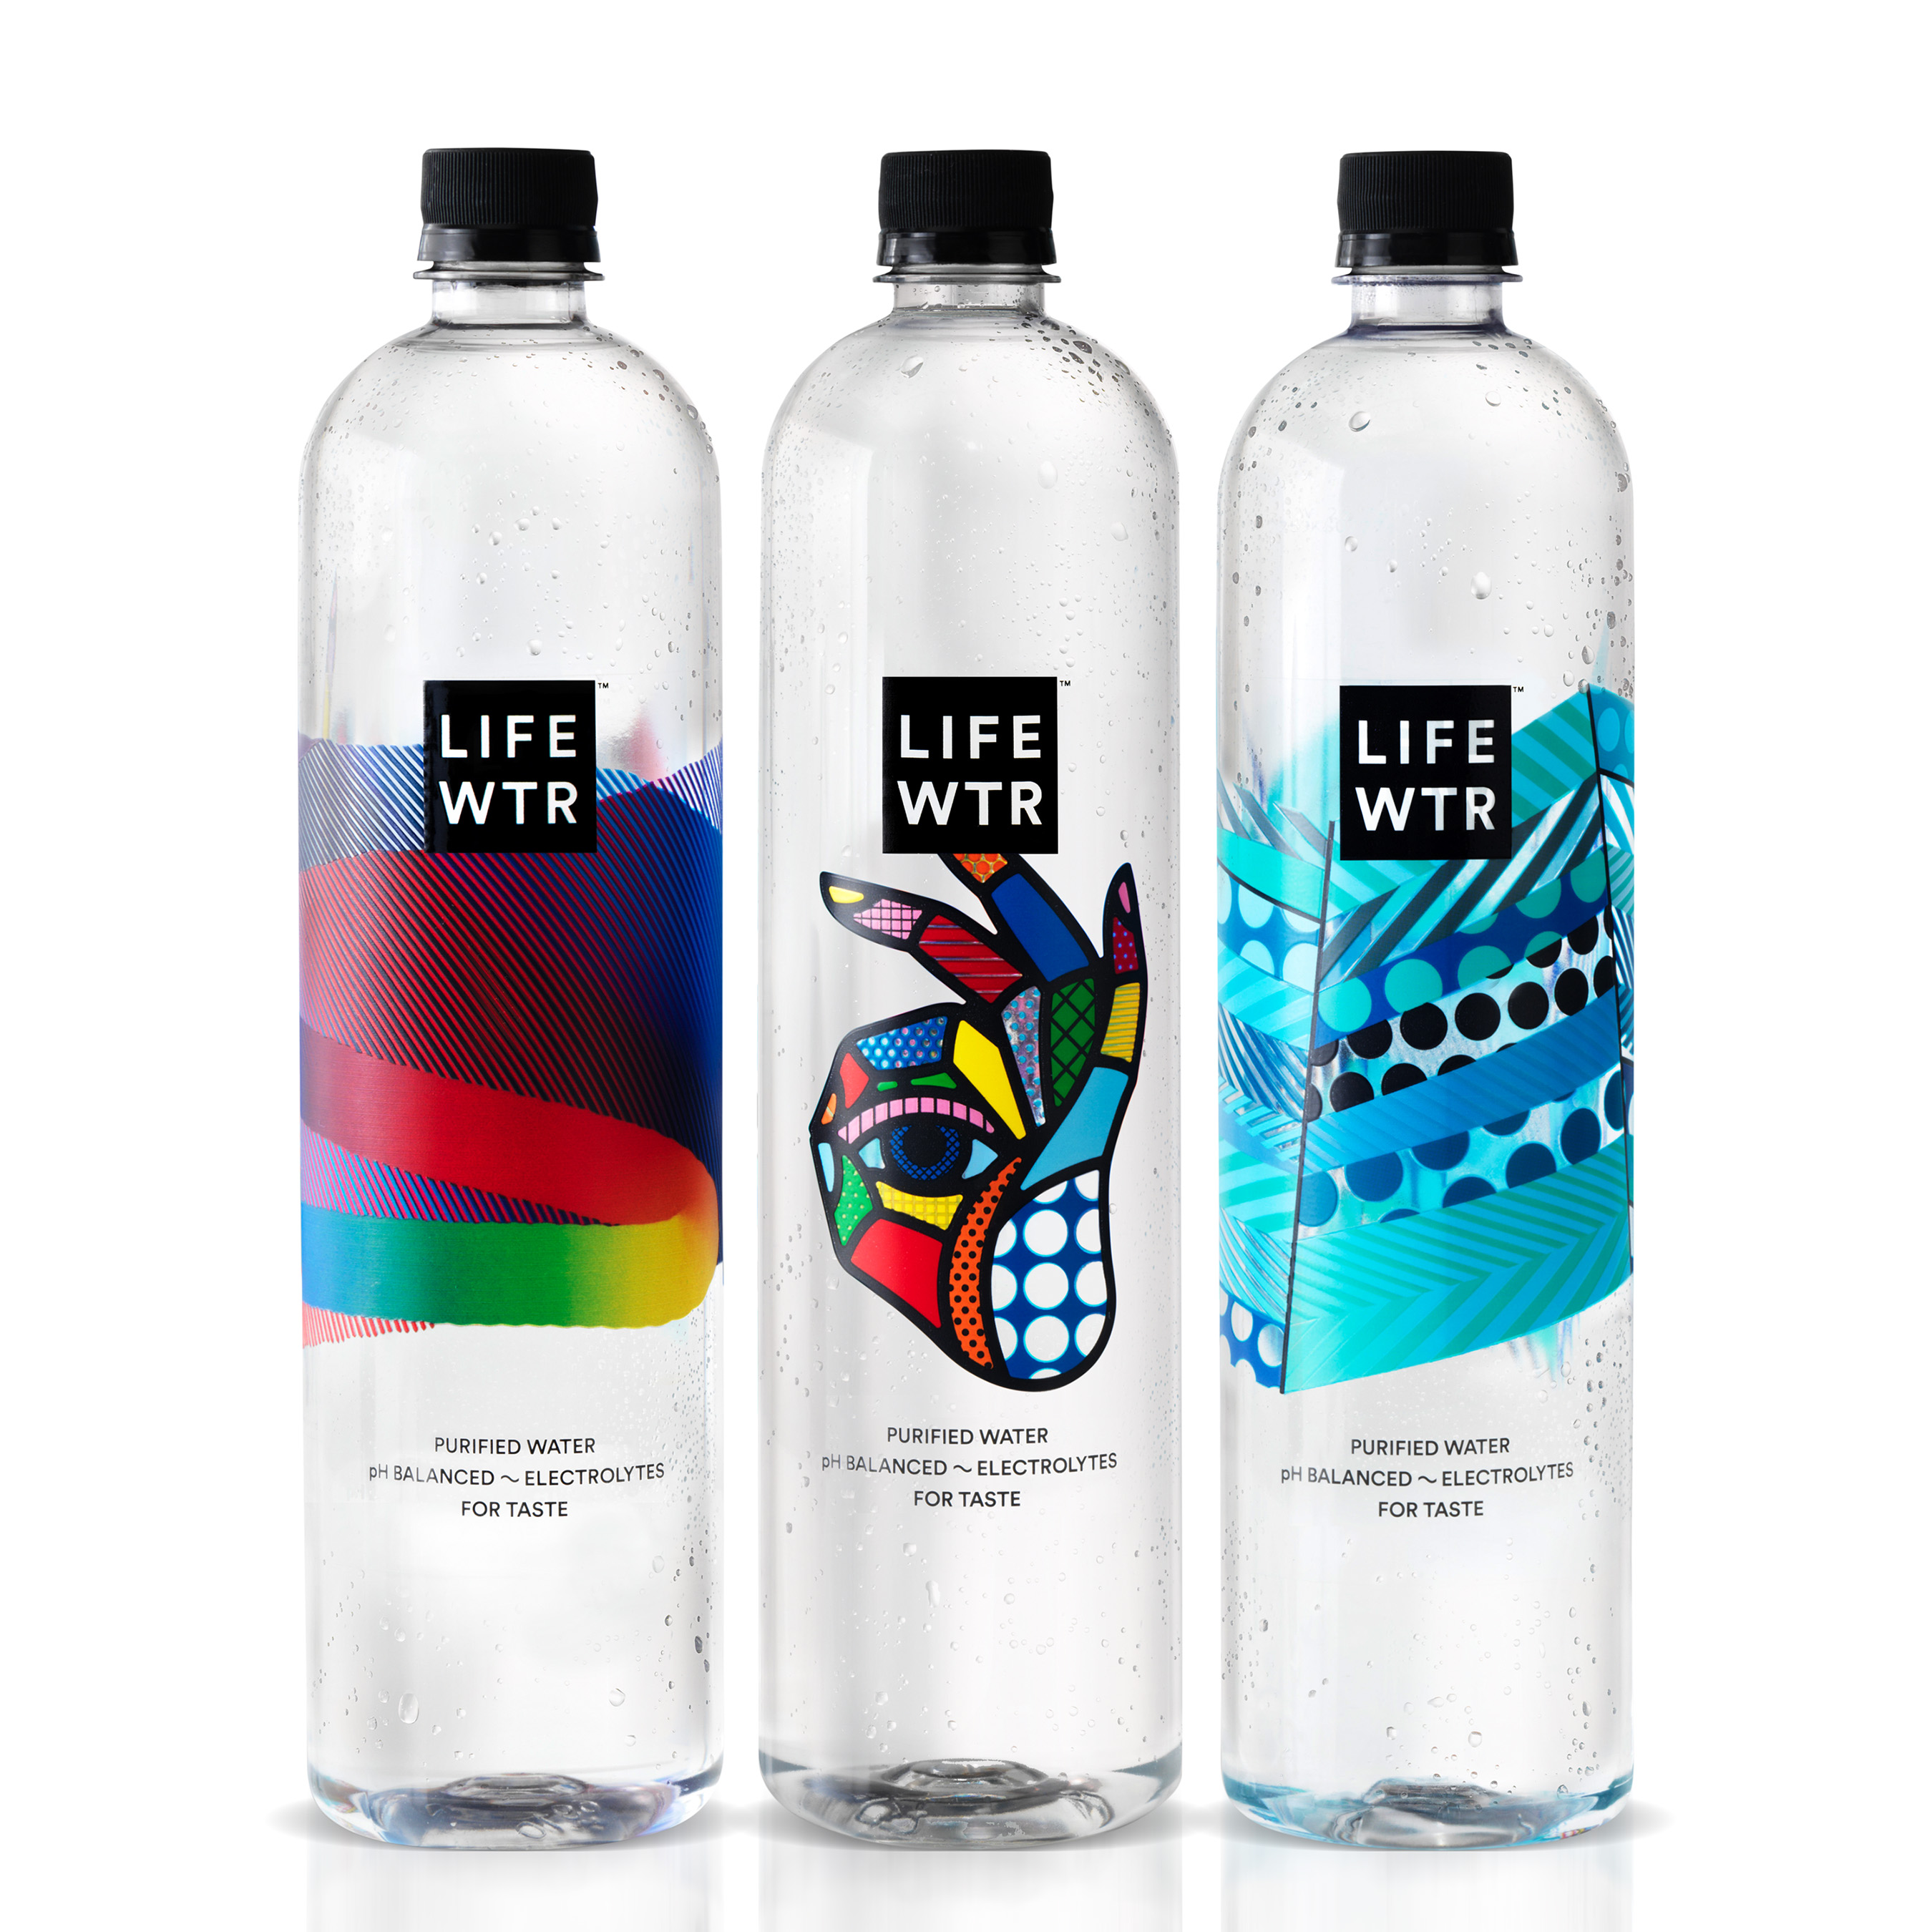 LIFEWTR from PepsiCo, a premium bottled water, fuses creativity & design to serve as a source of inspiration and hydration. Its label serves as a canvas for art & design, created by emerging artists.